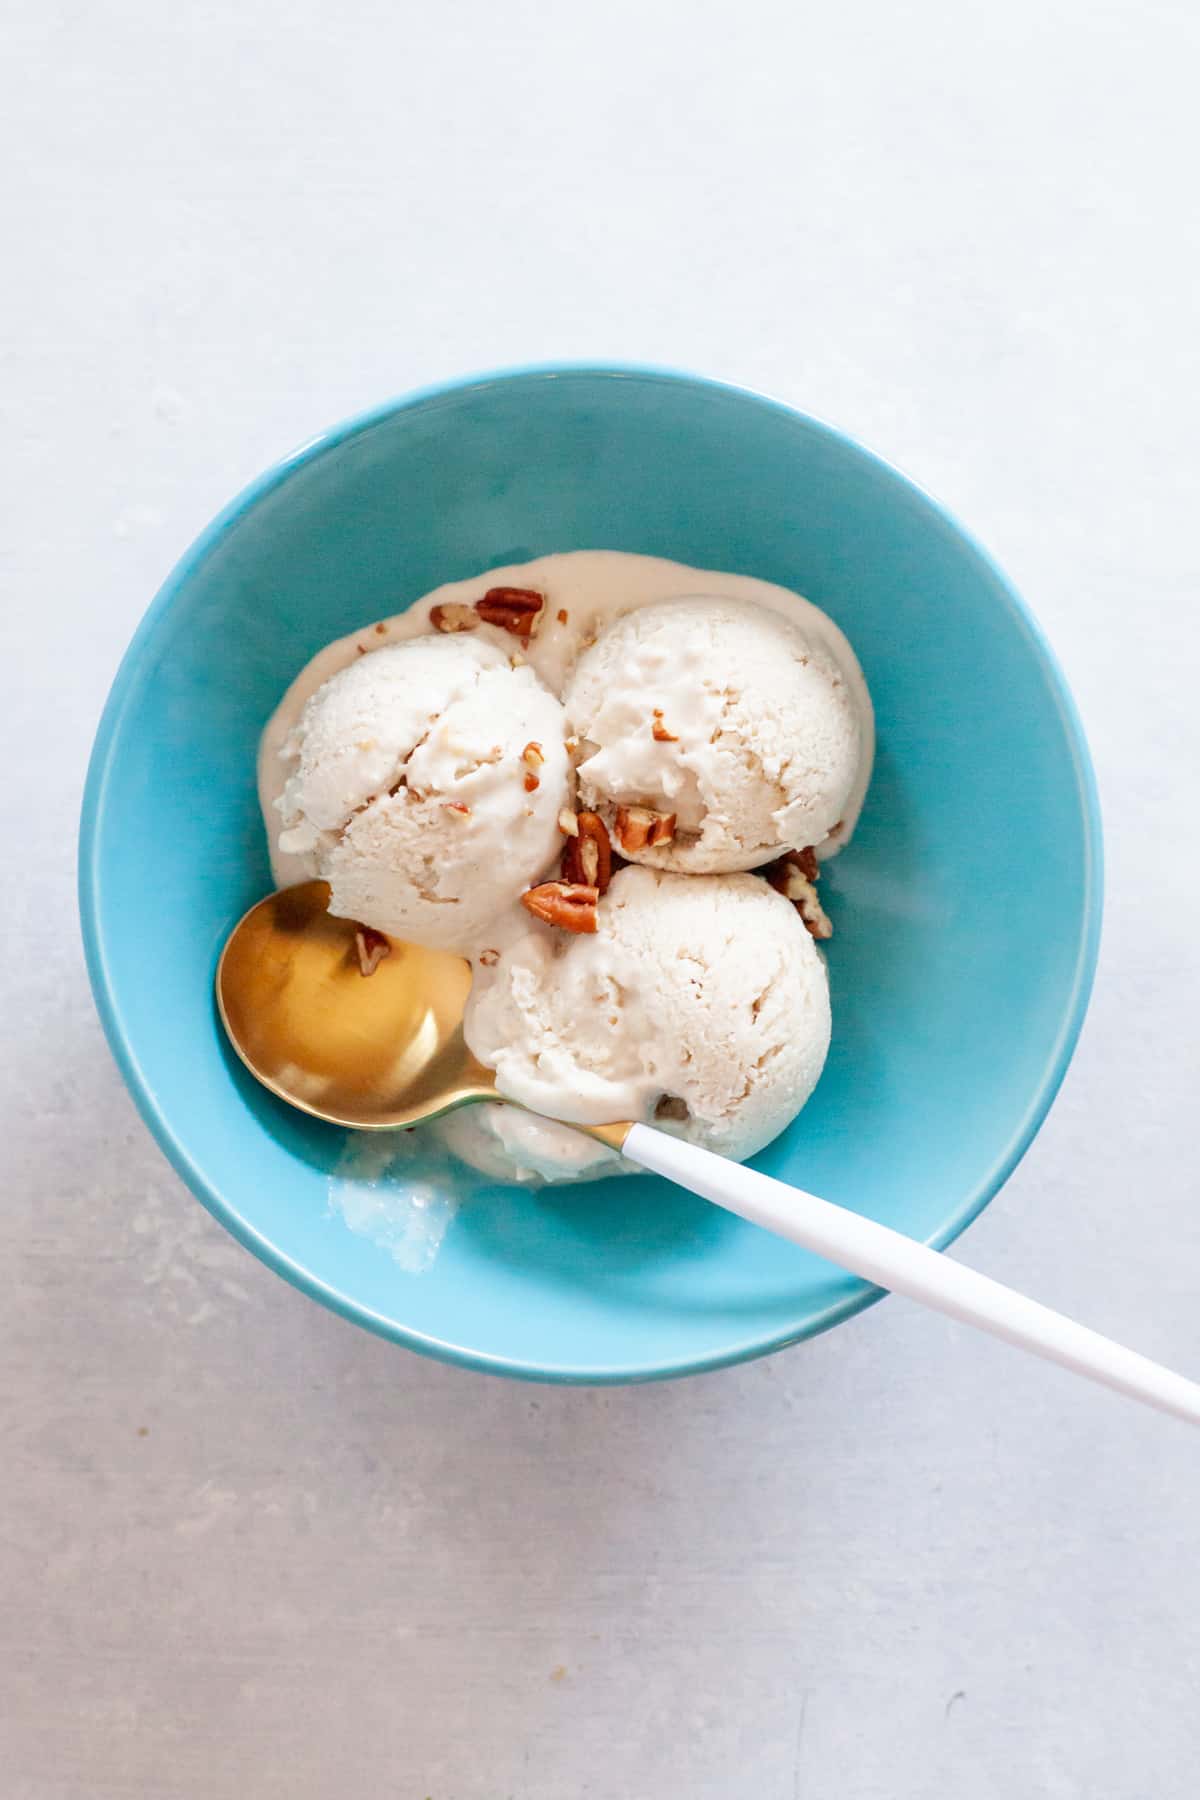 A gold spoon sits in a turquoise bowl with 3 scoops of cashew ice cream.